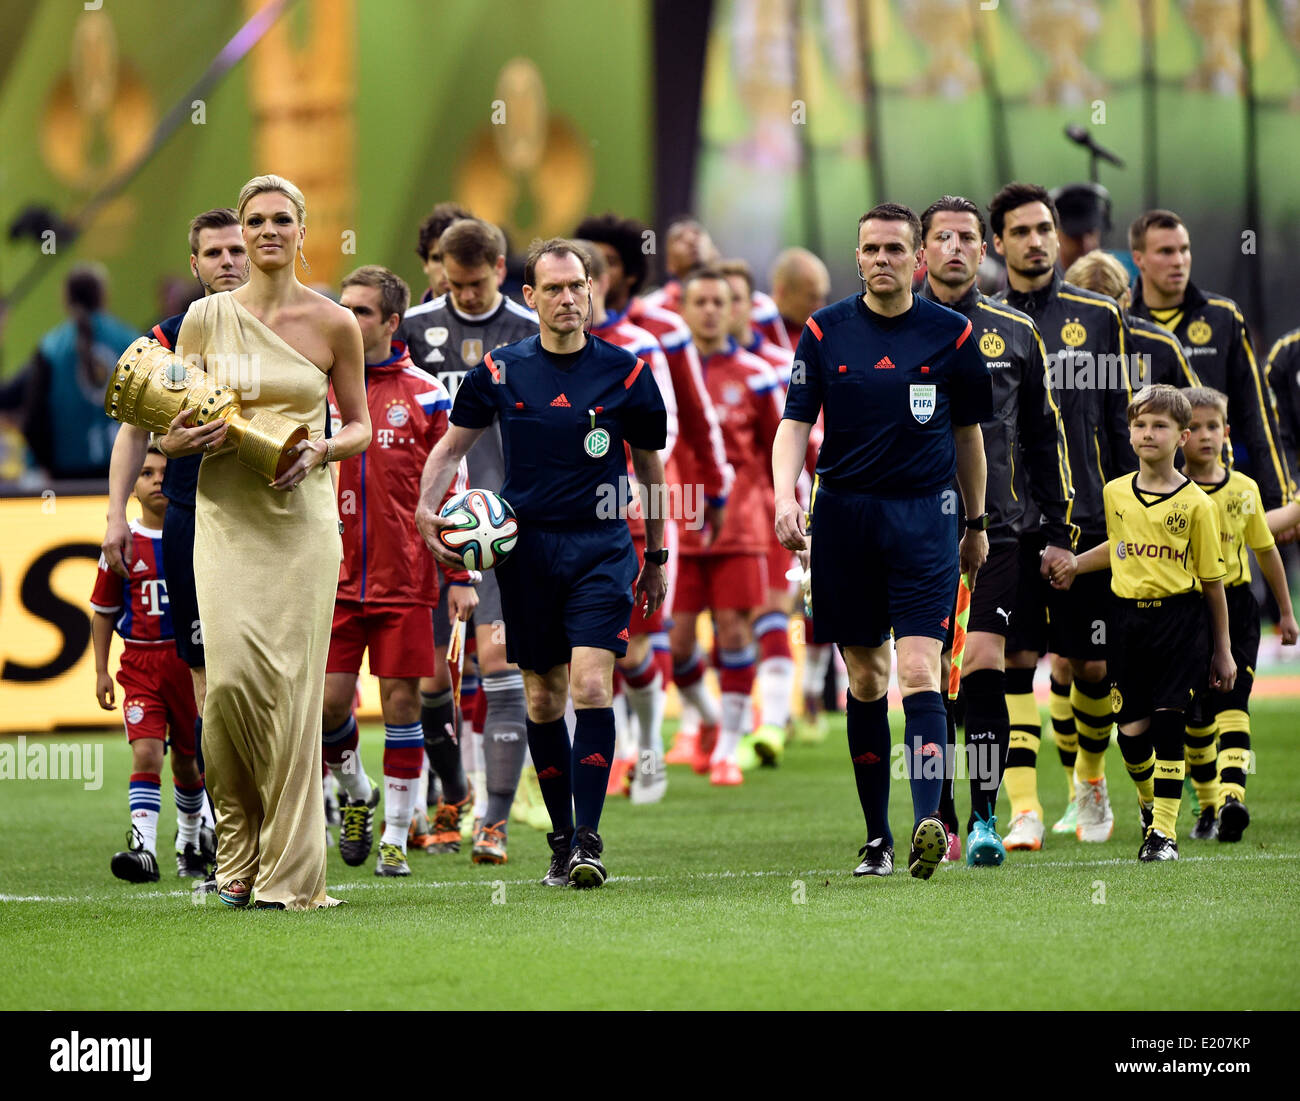 Maria Höfl-Riesch carries the DFB Cup into the stadium, opening ceremony, DFB Cup final, Olympiastadion, Berlin, Germany Stock Photo